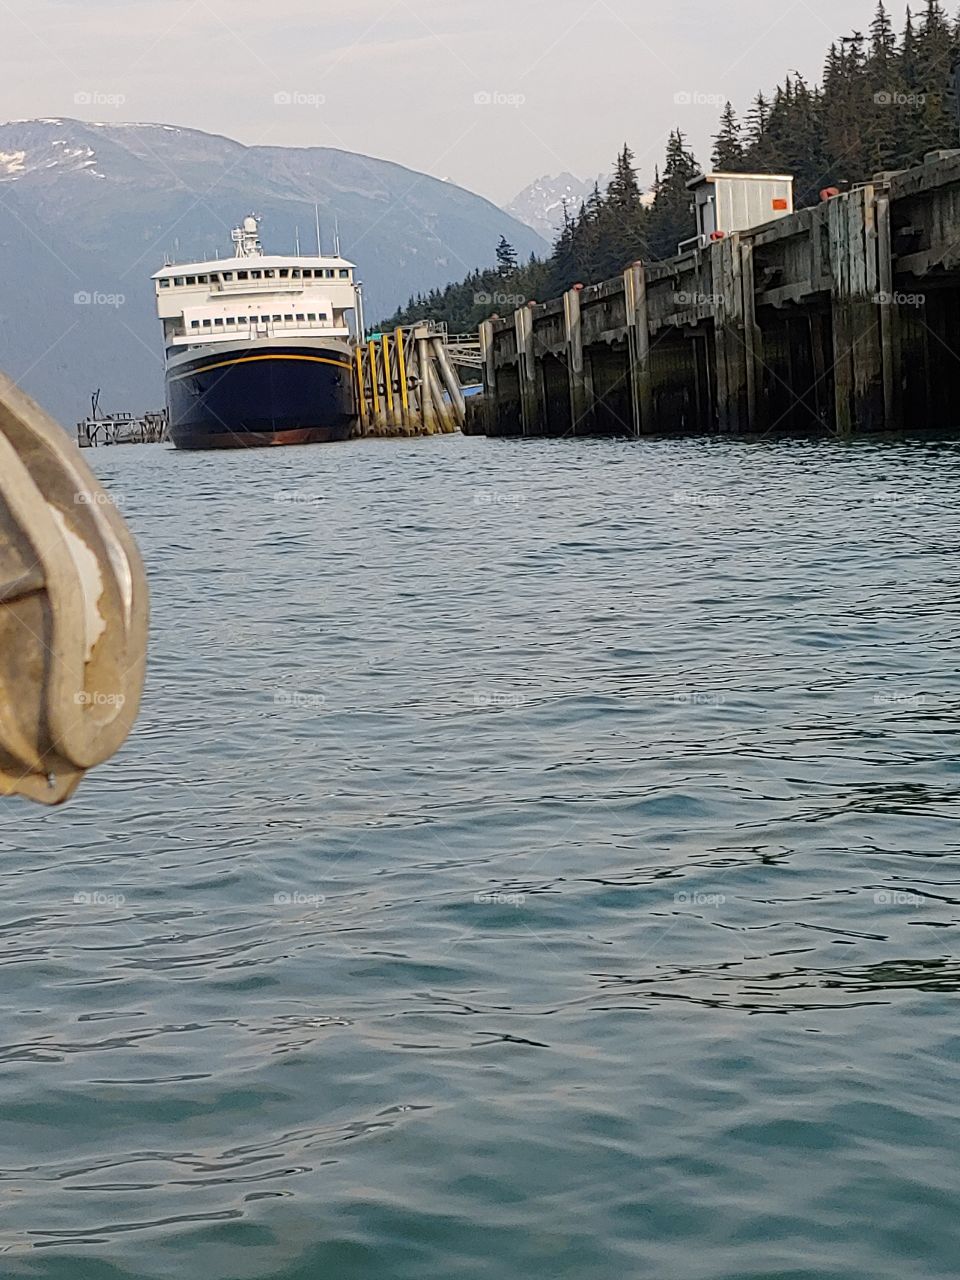 The Haines, AK ferry